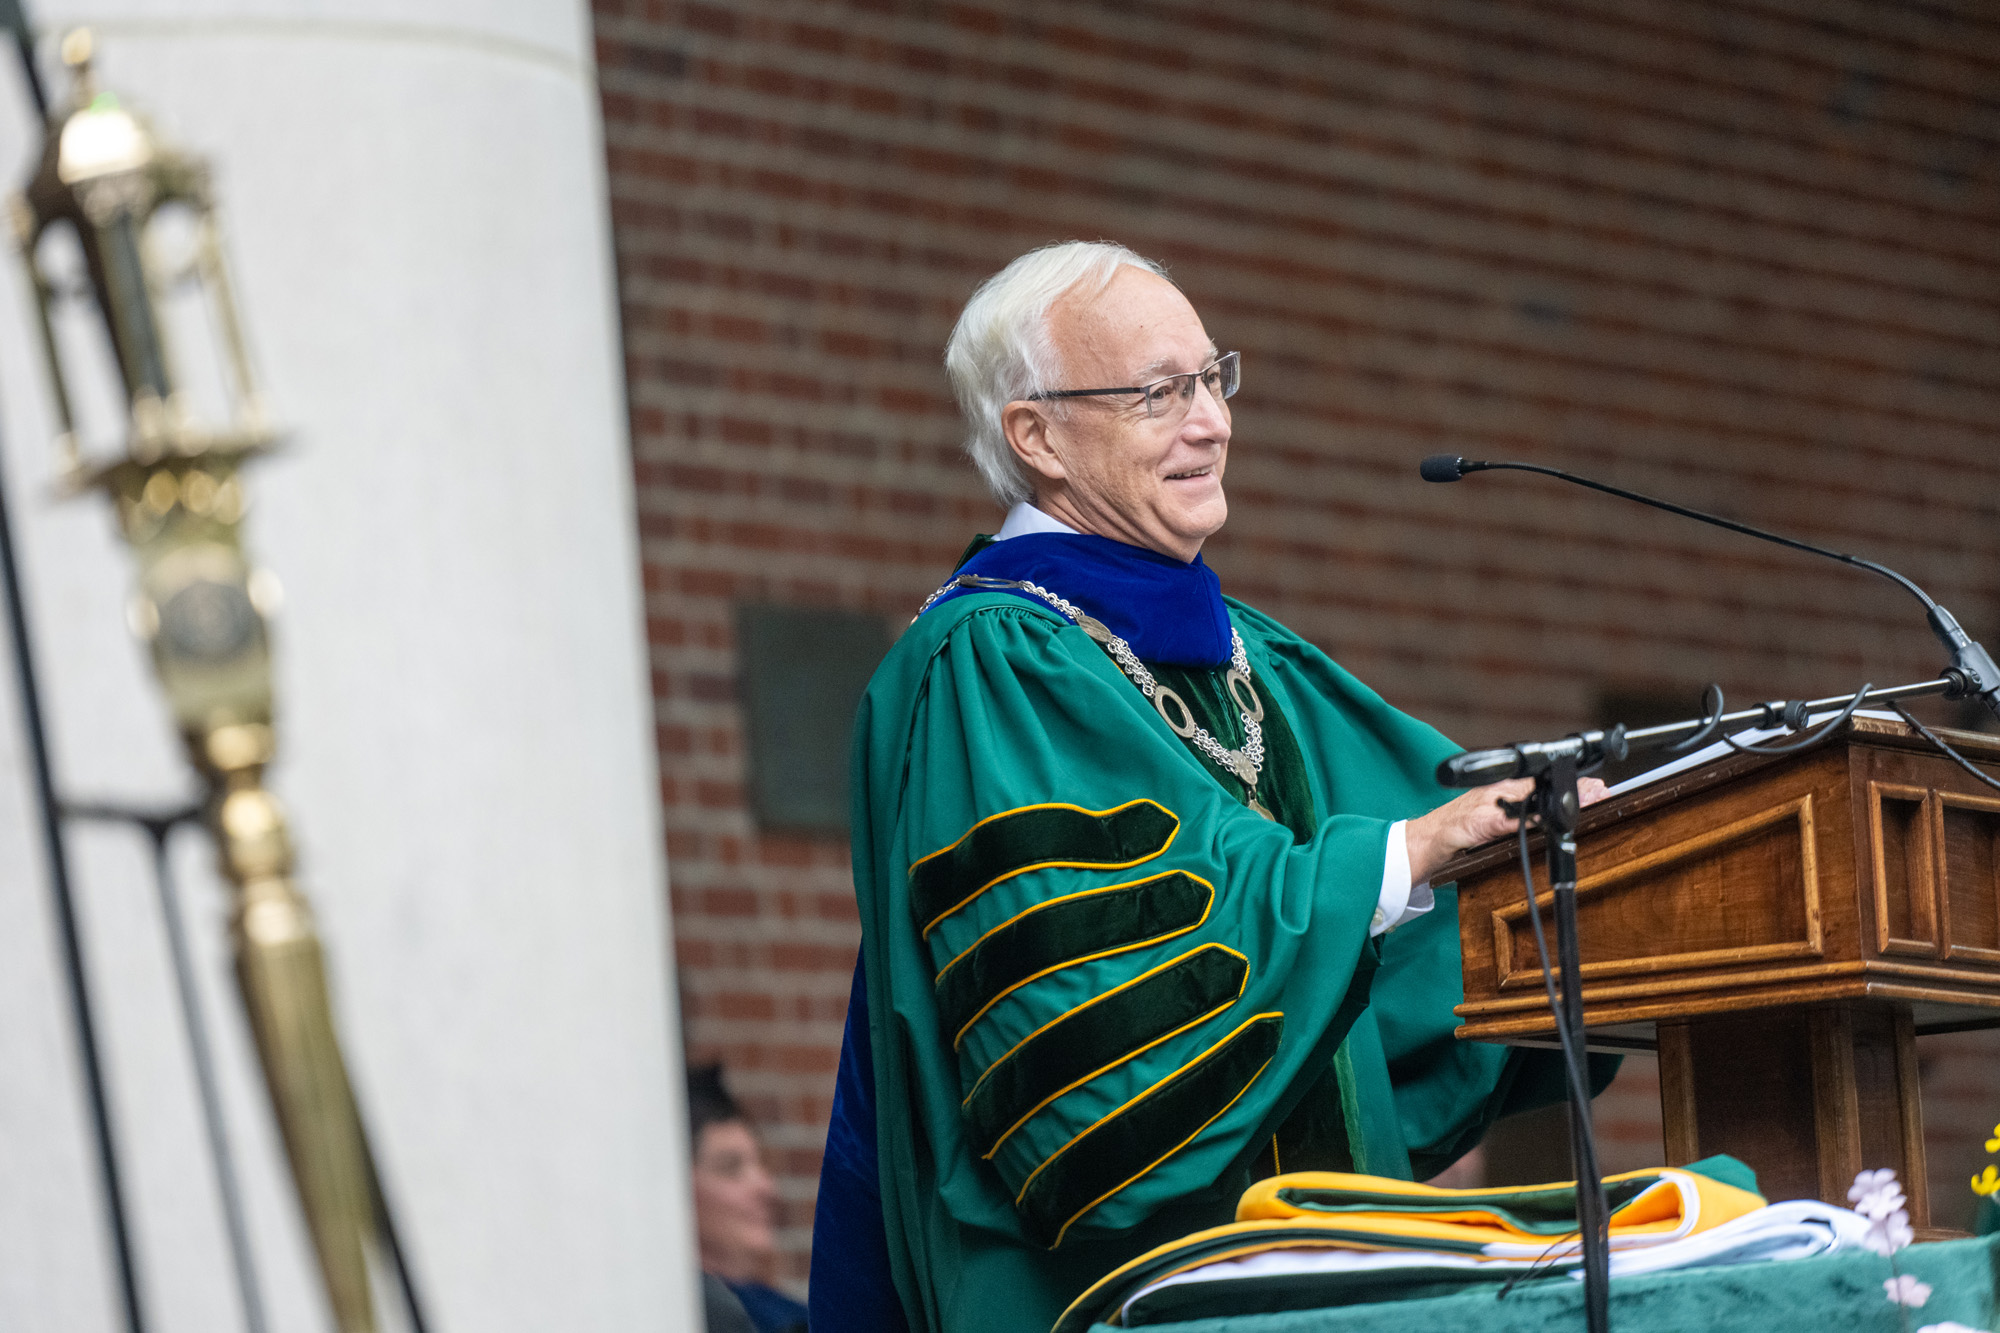 President Sherman at the podium during the 2020 rescheduled Commencement